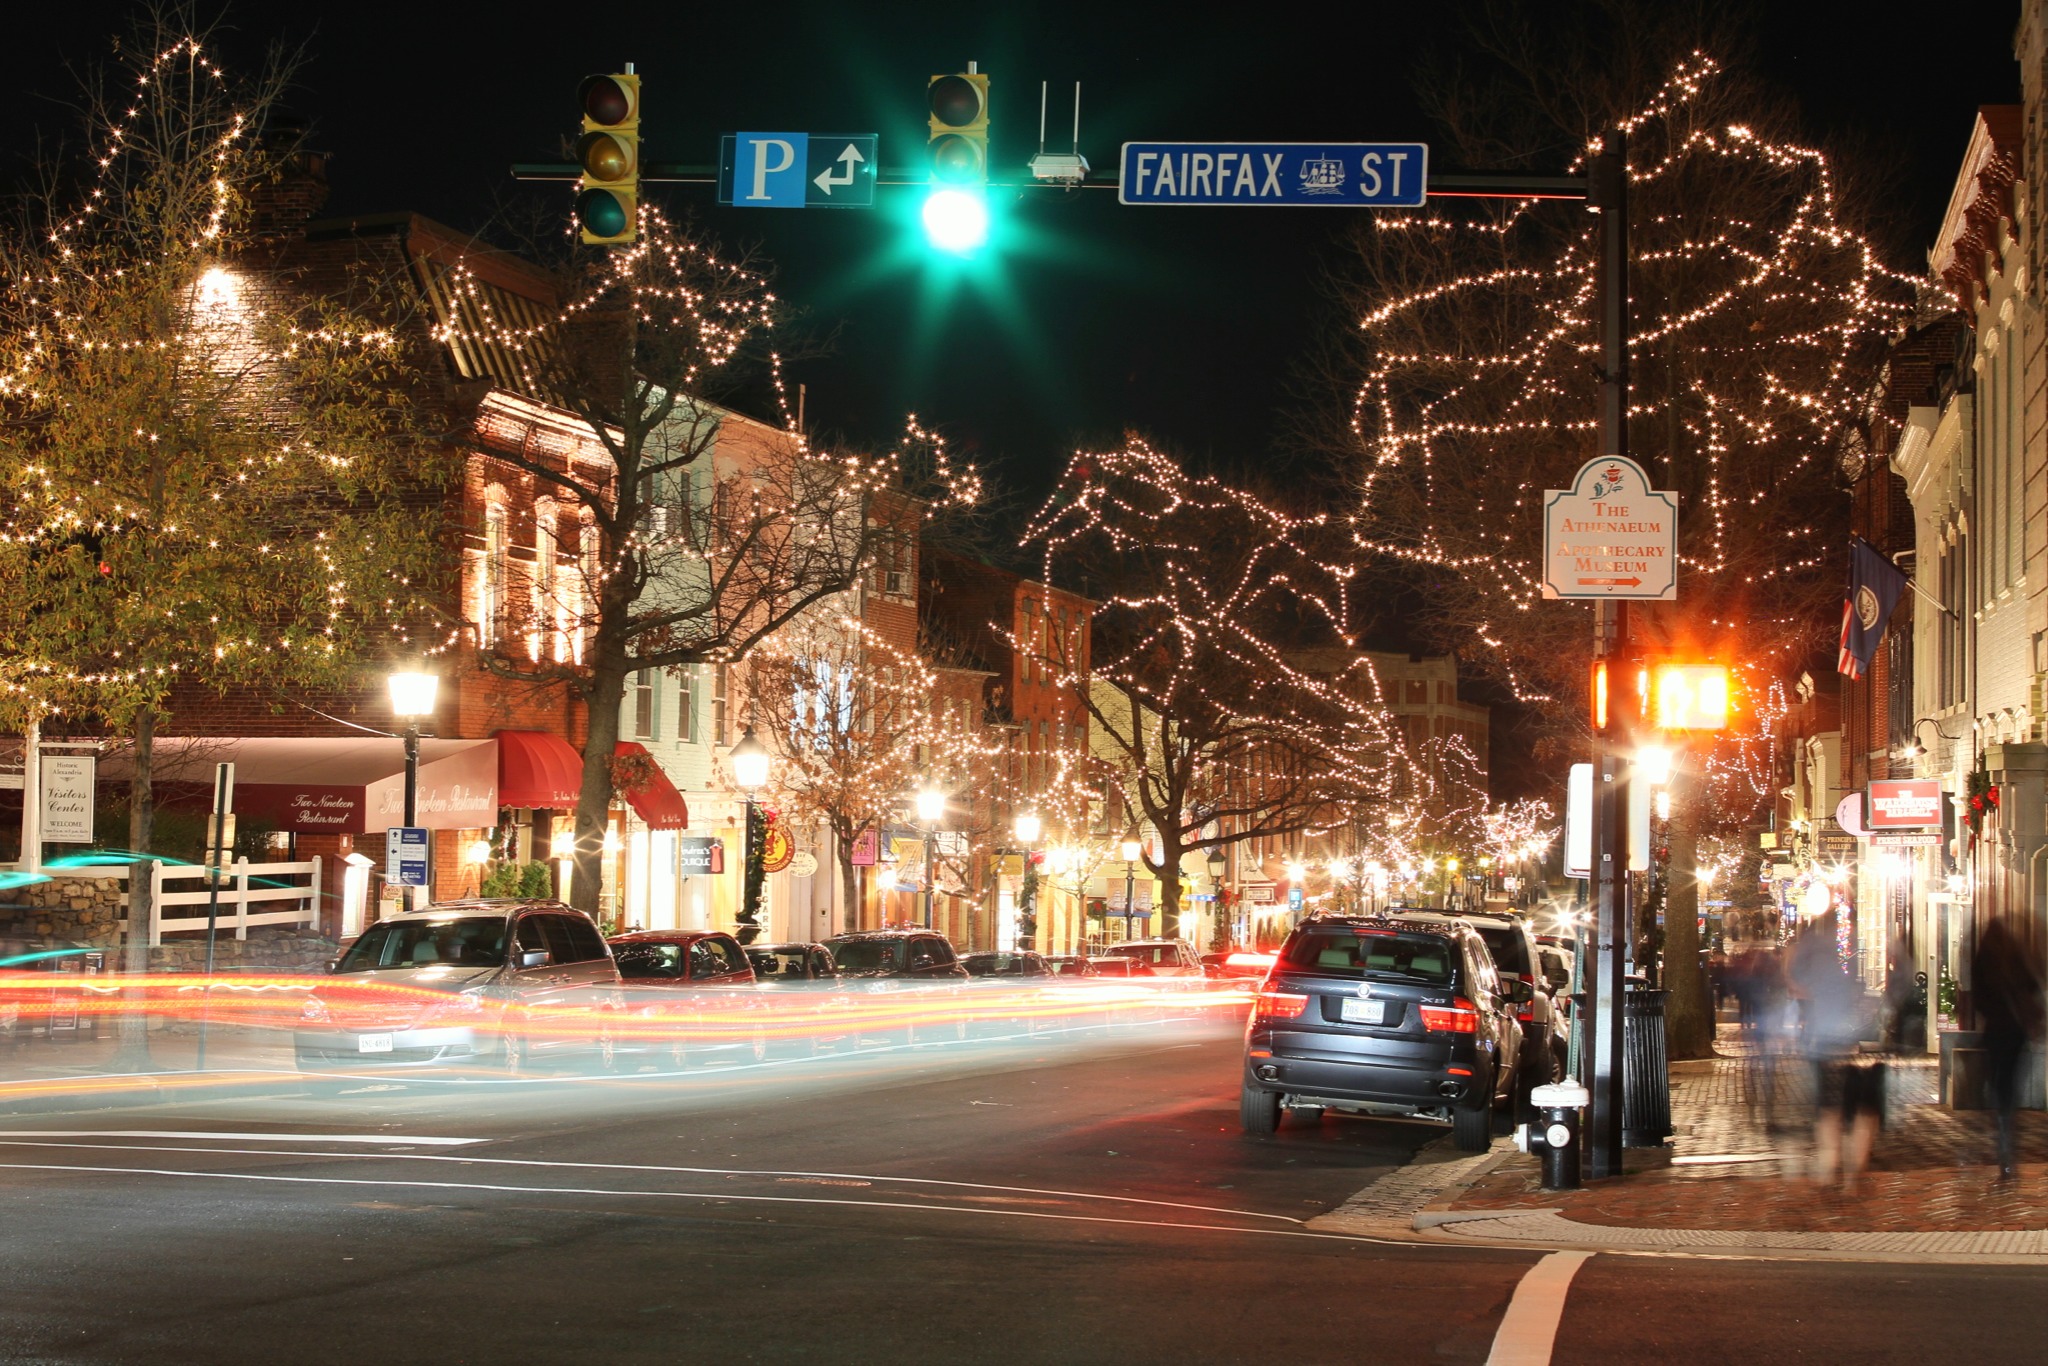 Old Town Wears Christmas Well - Photos by Christmas Light